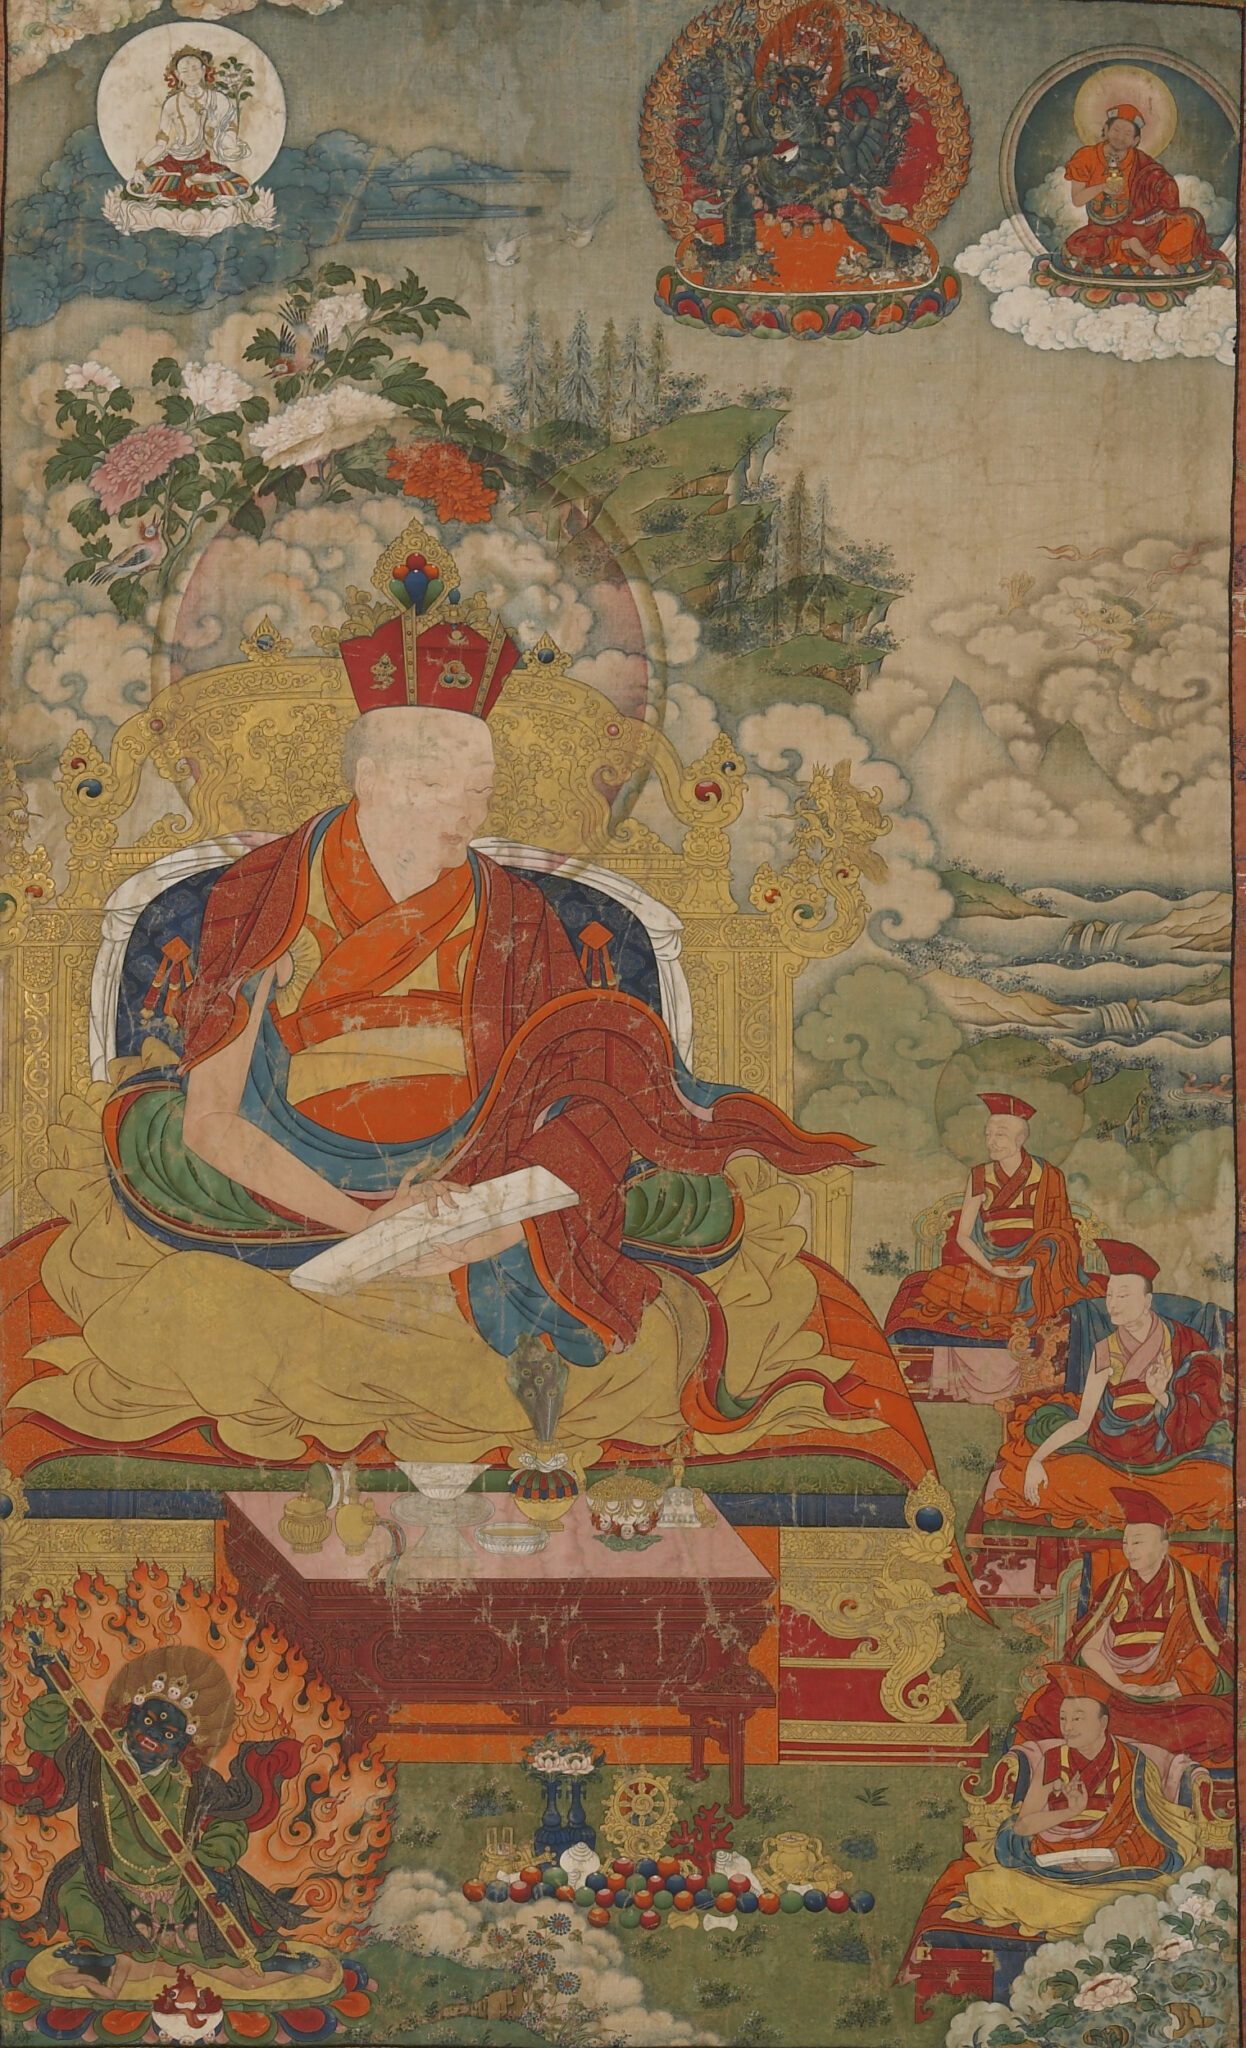 Larger than life-size lama seated on golden throne before followers, altar, and wrathful deity